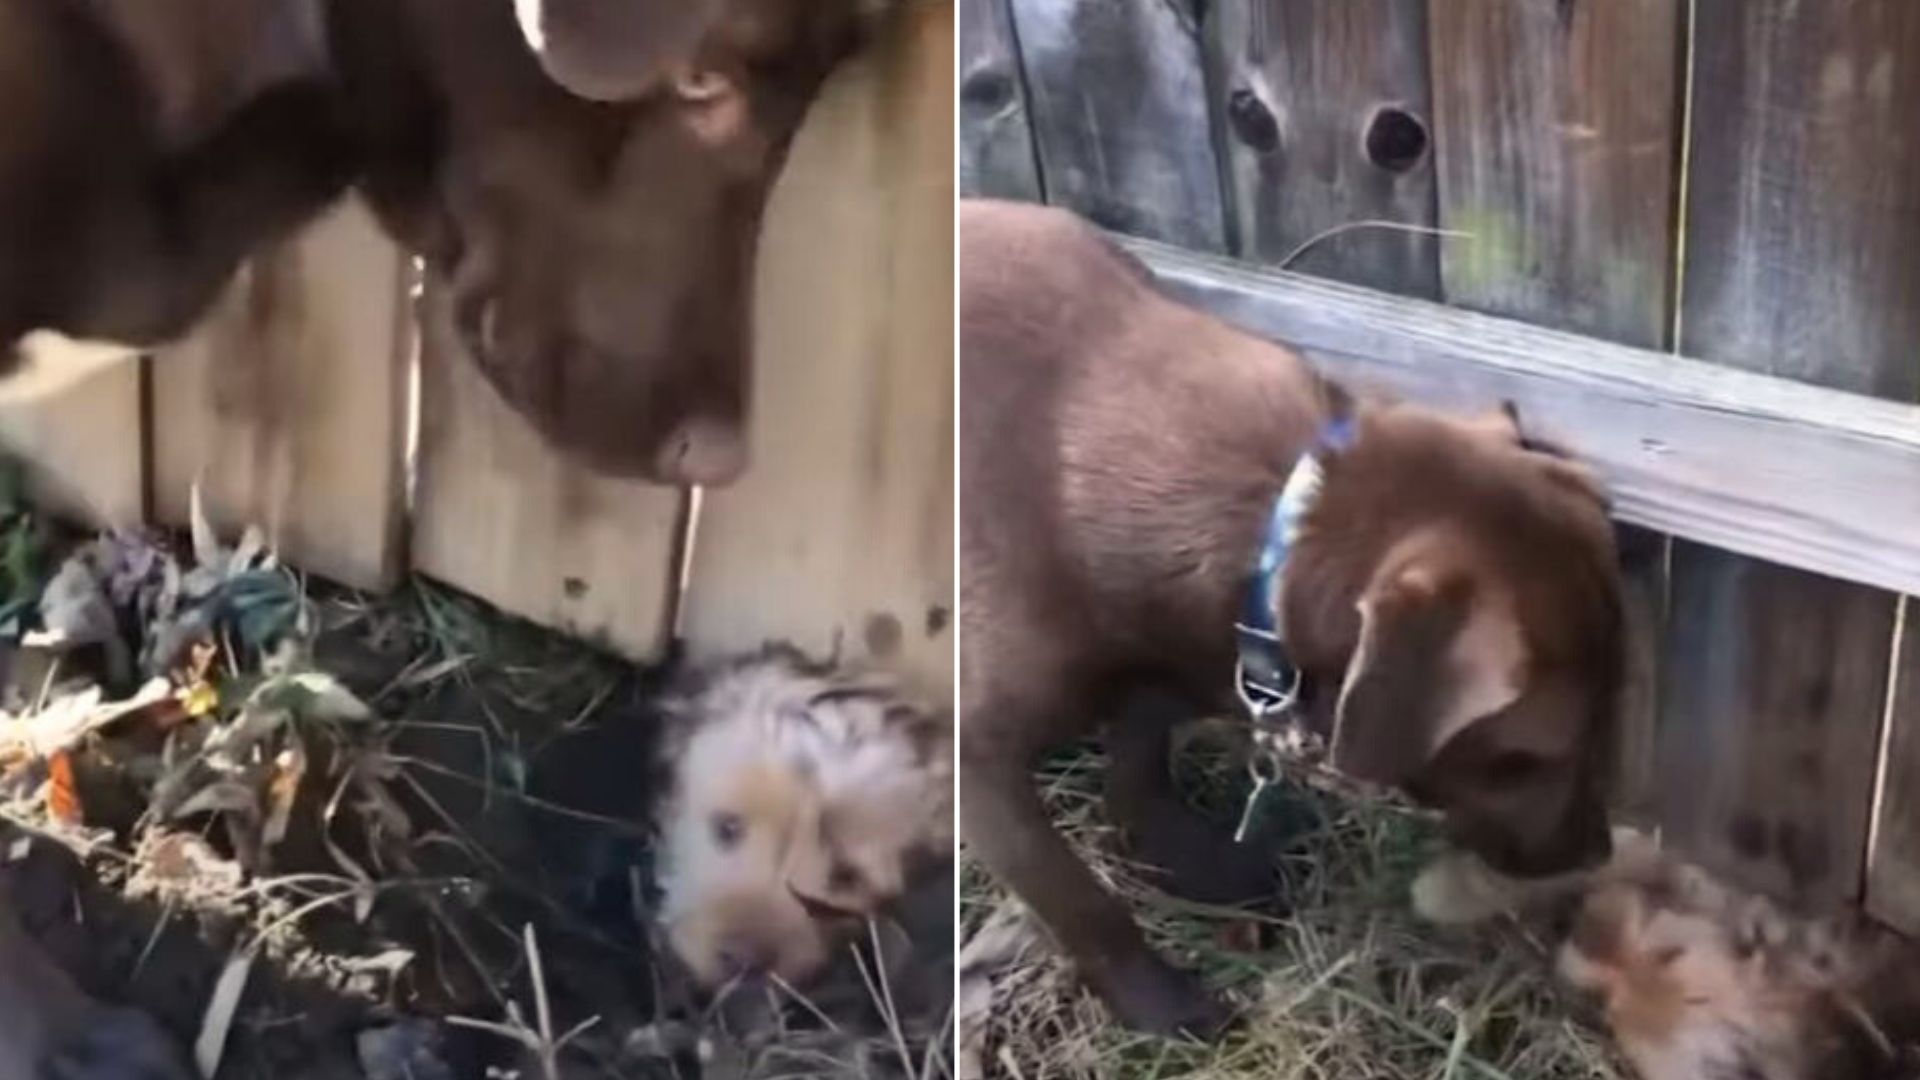 A Sweet Dog Dug A Tunnel Under Neighbor’s Fence So He Could Play With His Friend